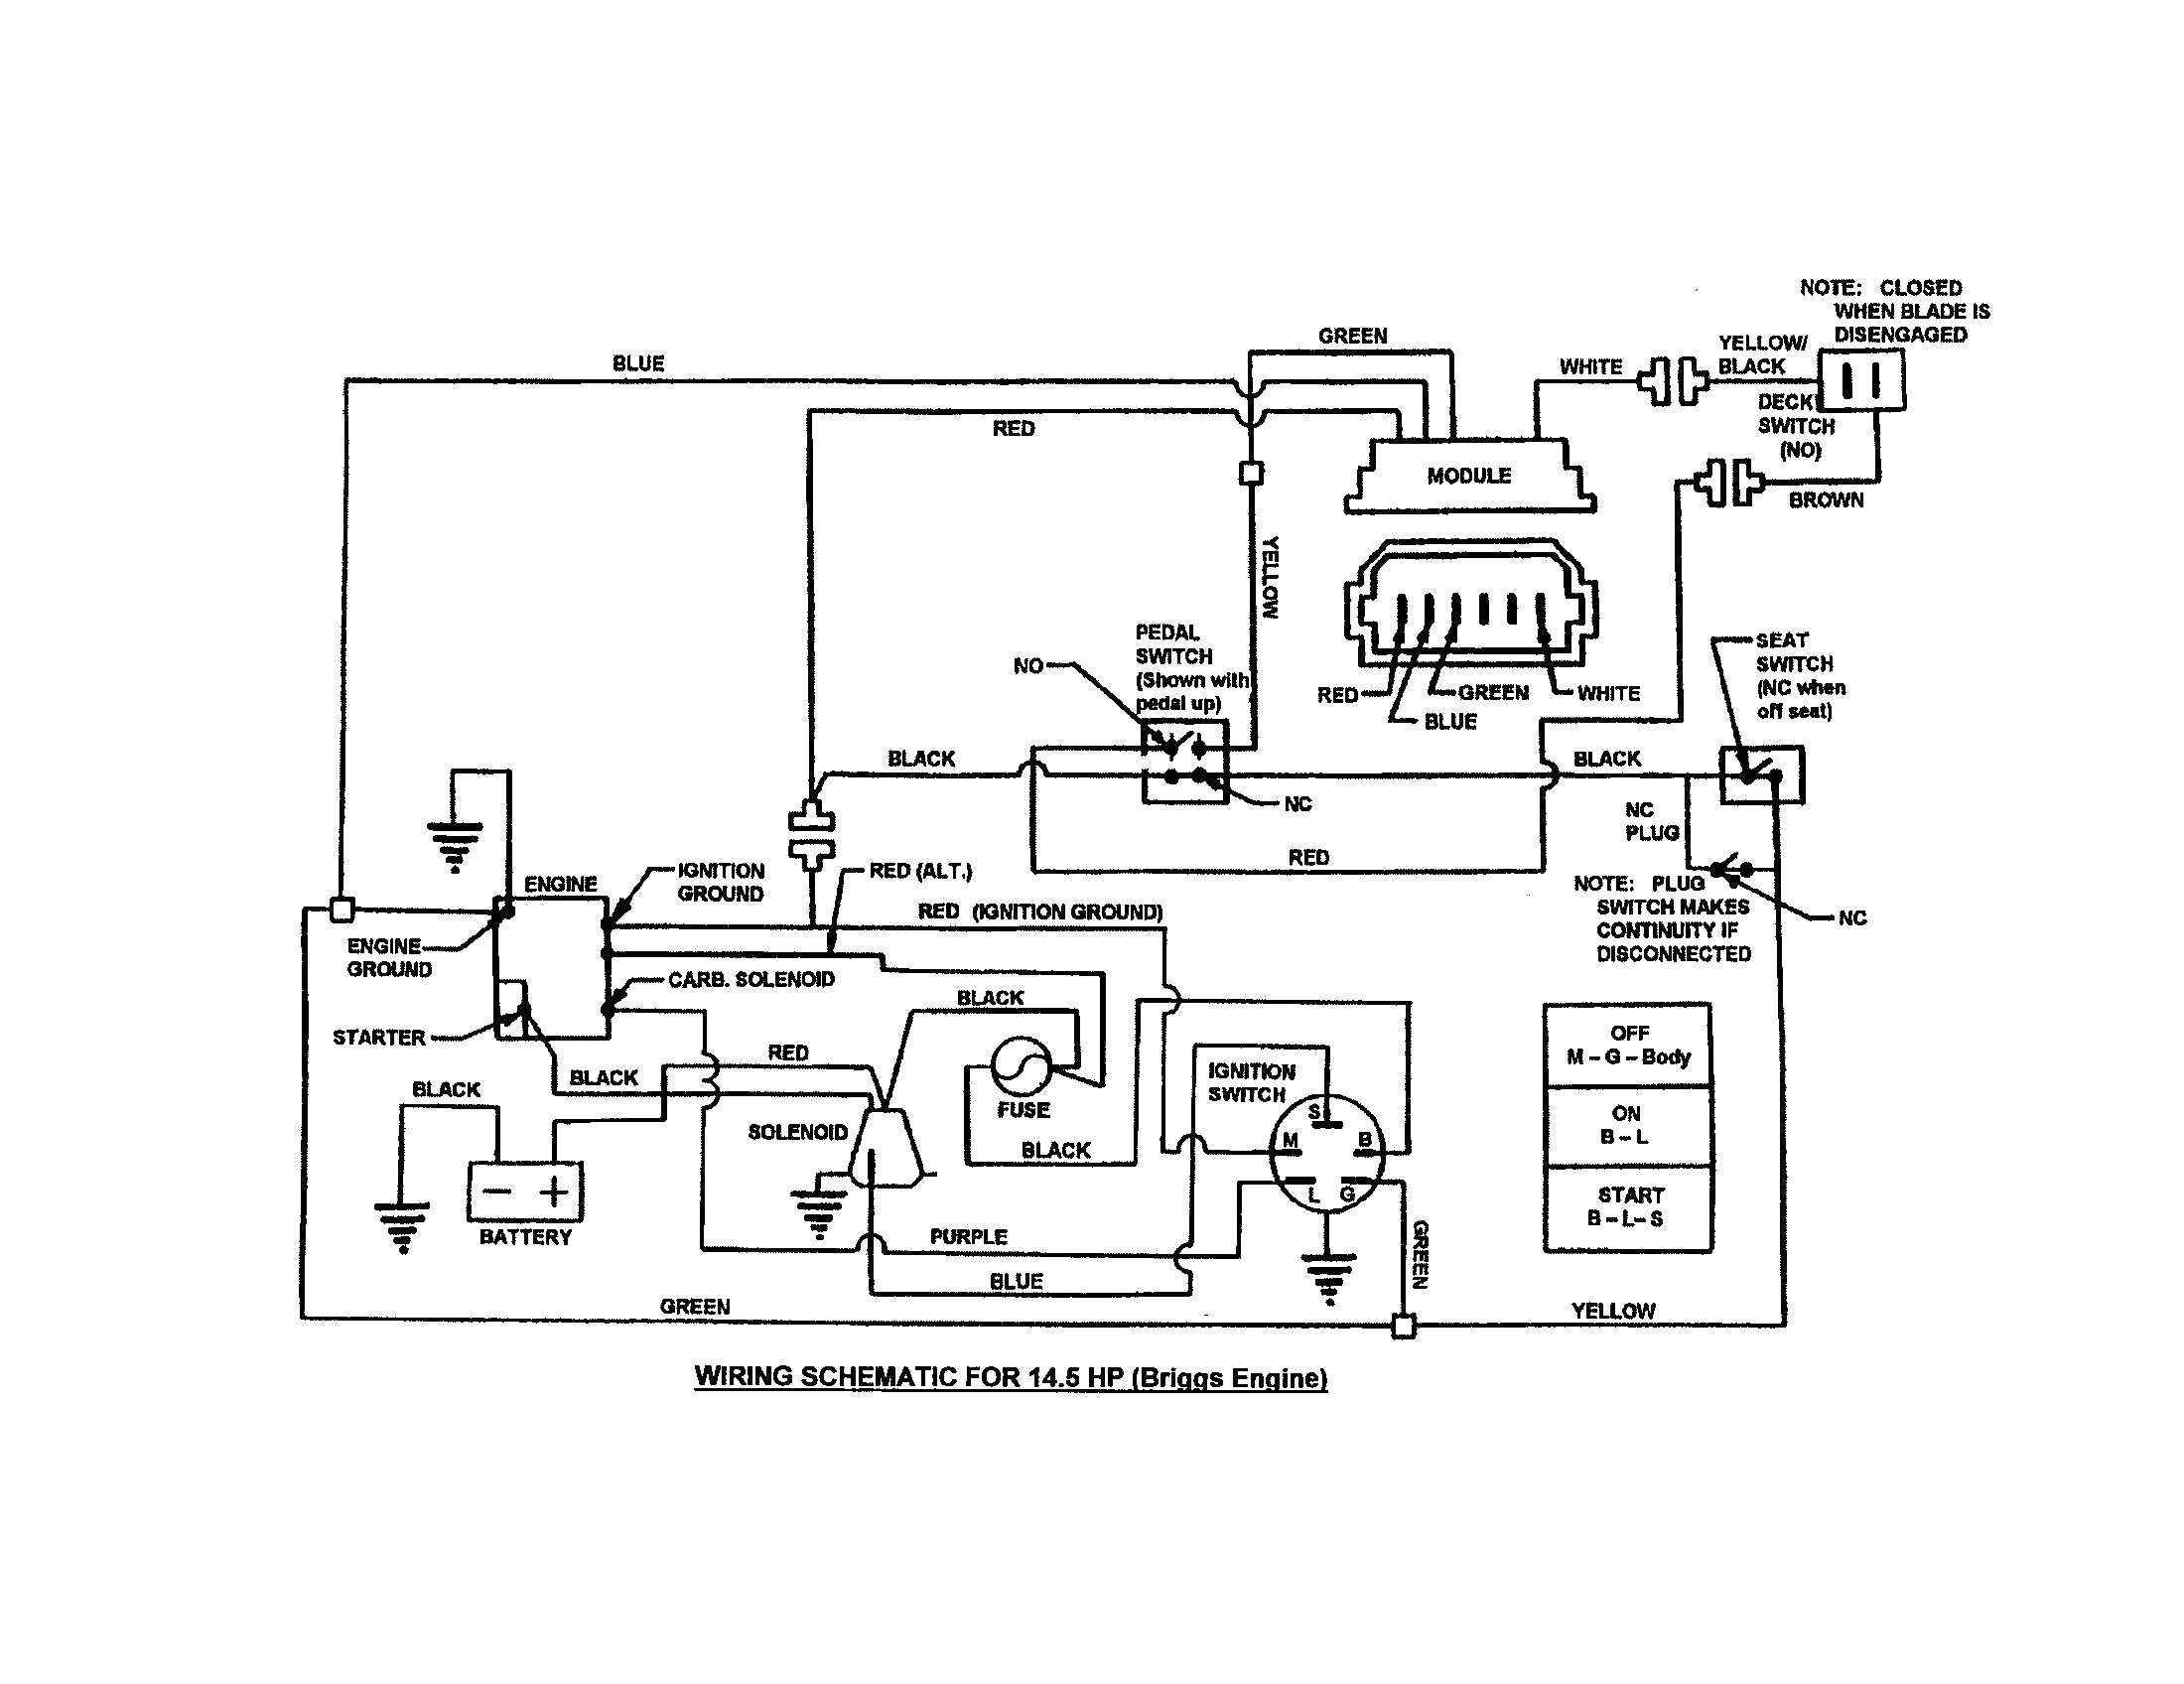 Murray Riding Lawn Mower Wiring Diagram Snapper Riding Lawn Mower Wiring Schematic Wiring Diagram Review